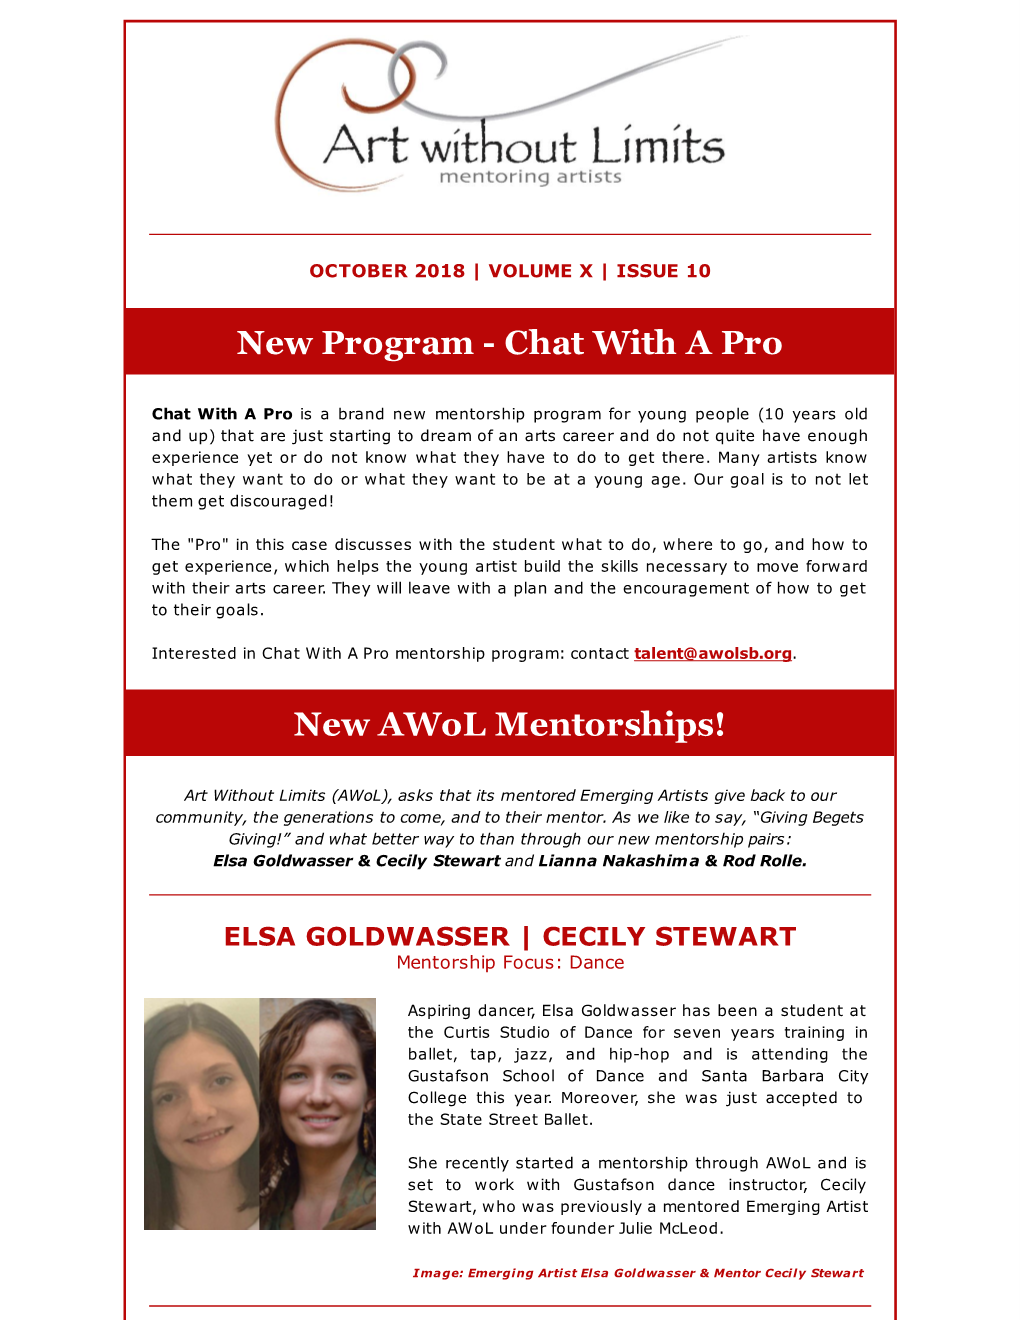 Chat with a Pro New Awol Mentorships!